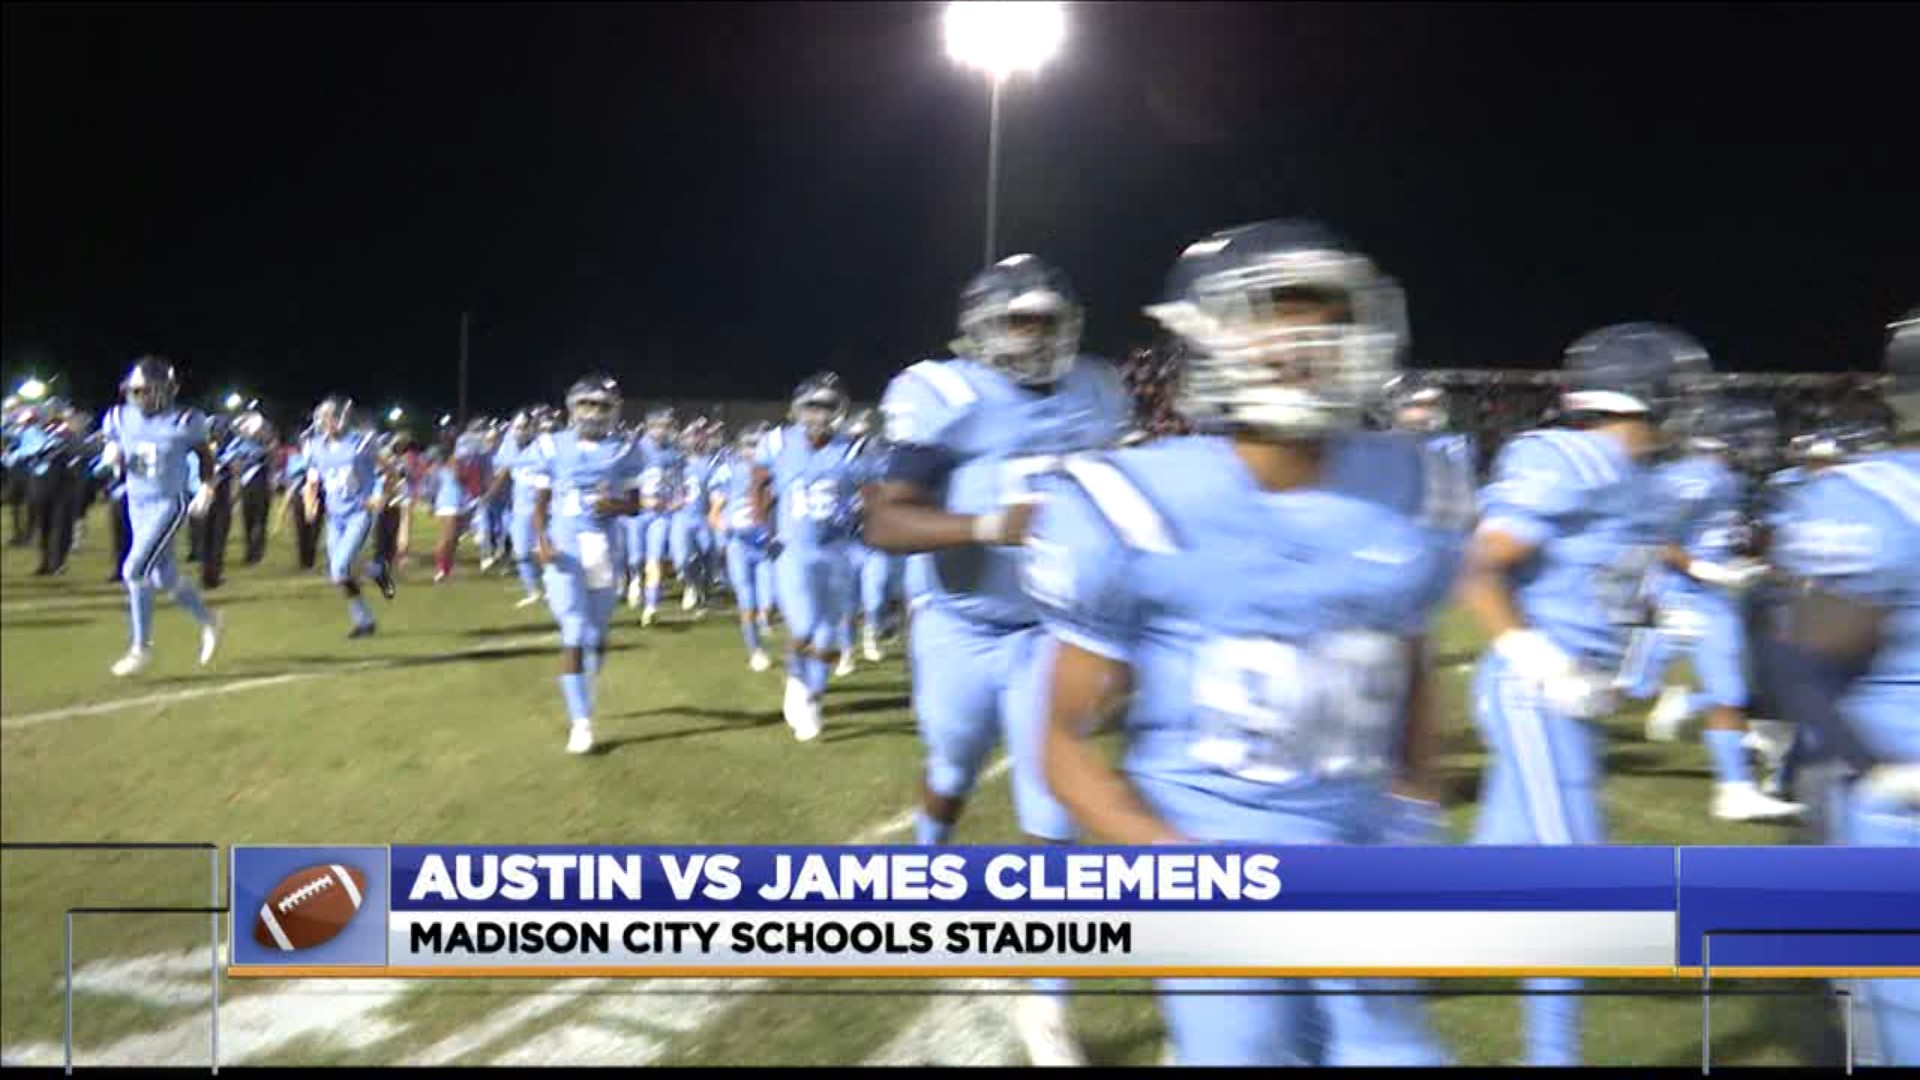 The James Clemens Jets finished region play with an undefeated record for the second year in row by defeating Austin 27-24.